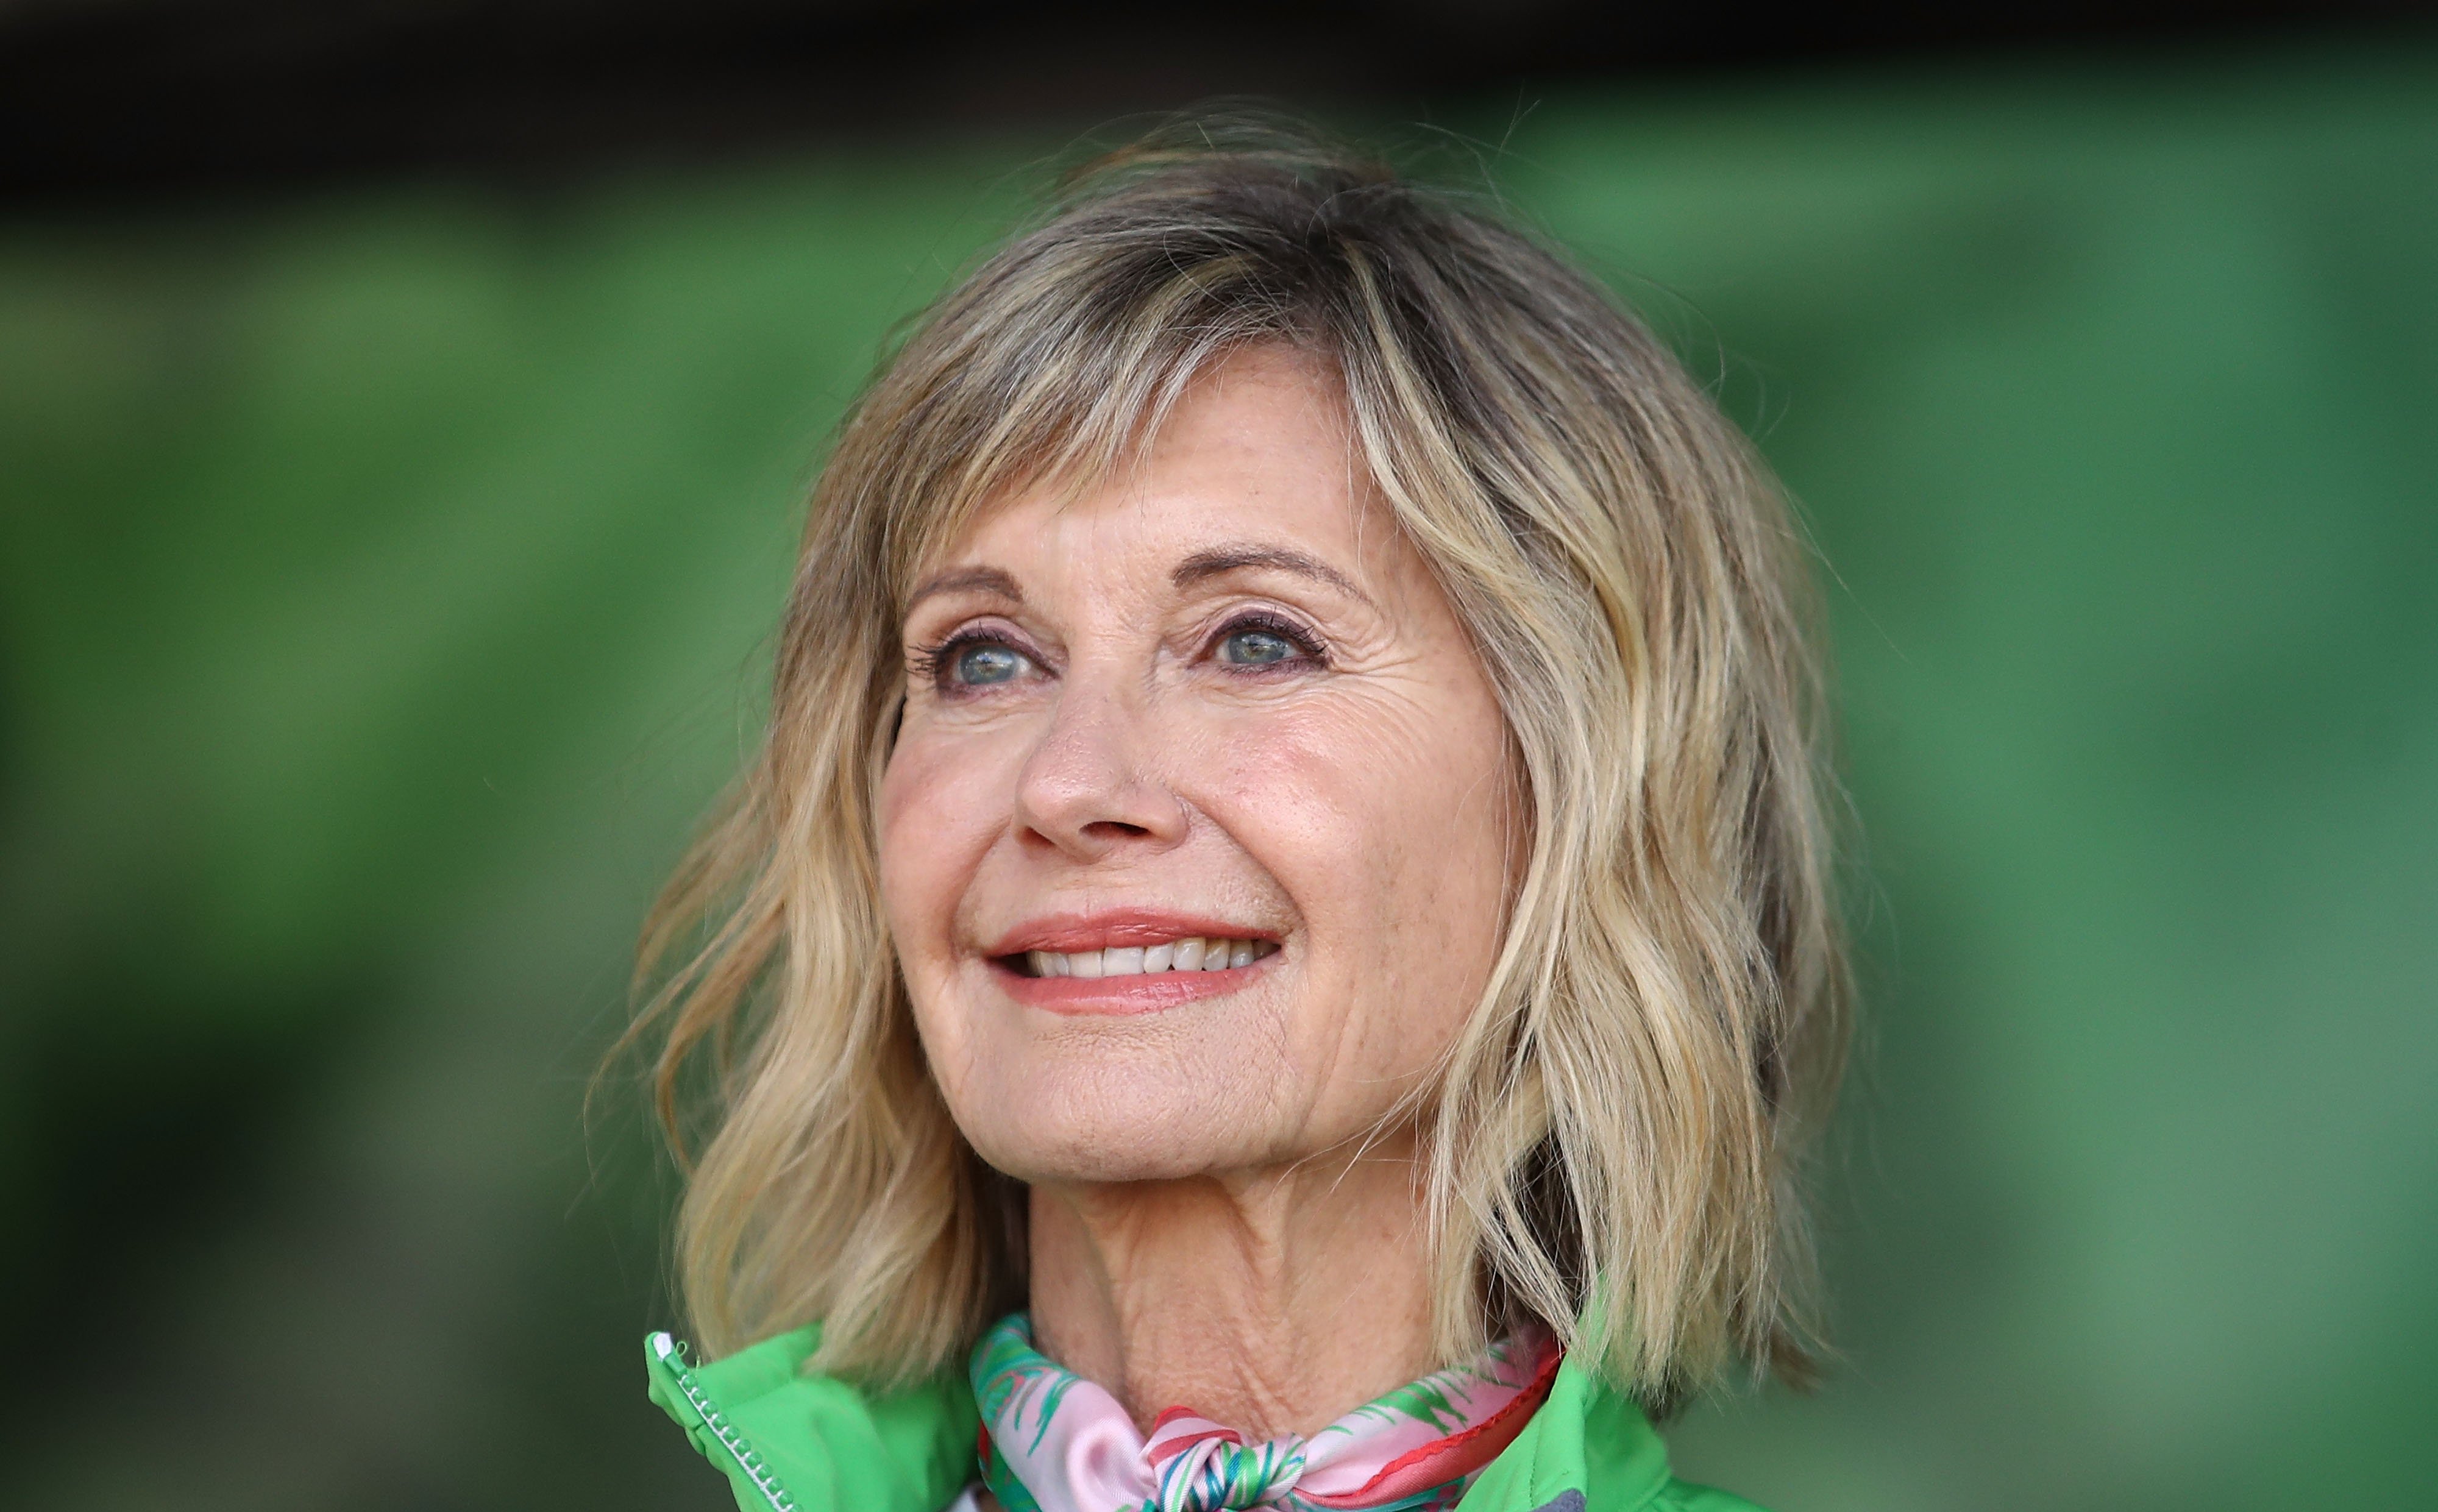 Olivia Newton-John during the annual Wellness Walk and Research Runon September 16, 2018 in Melbourne, Australia. | Source: Getty Images